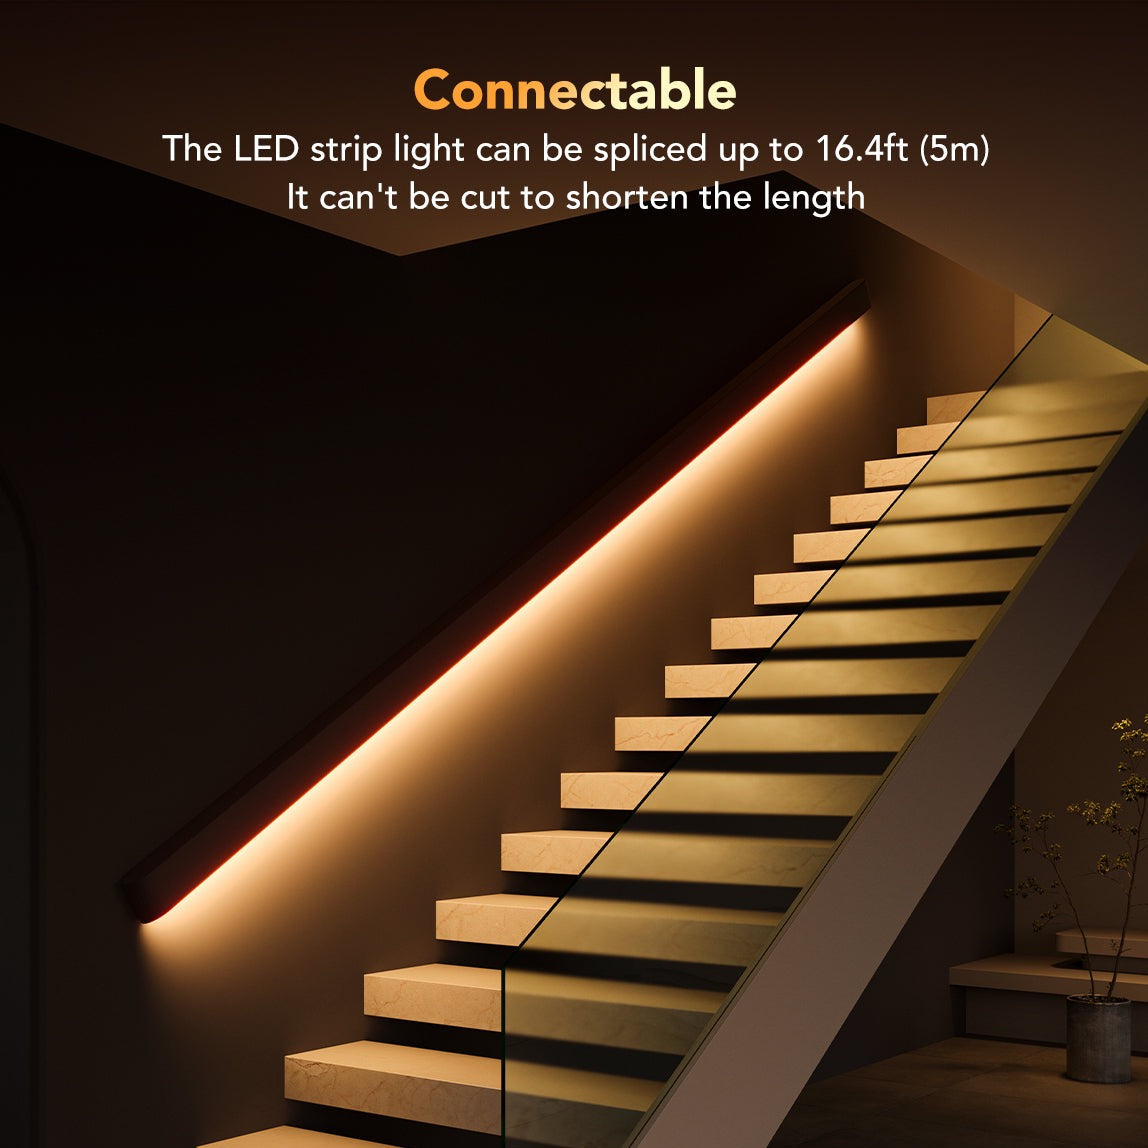 Govee LED strip lights review: The new M1 strip light supports Matter -  Reviewed